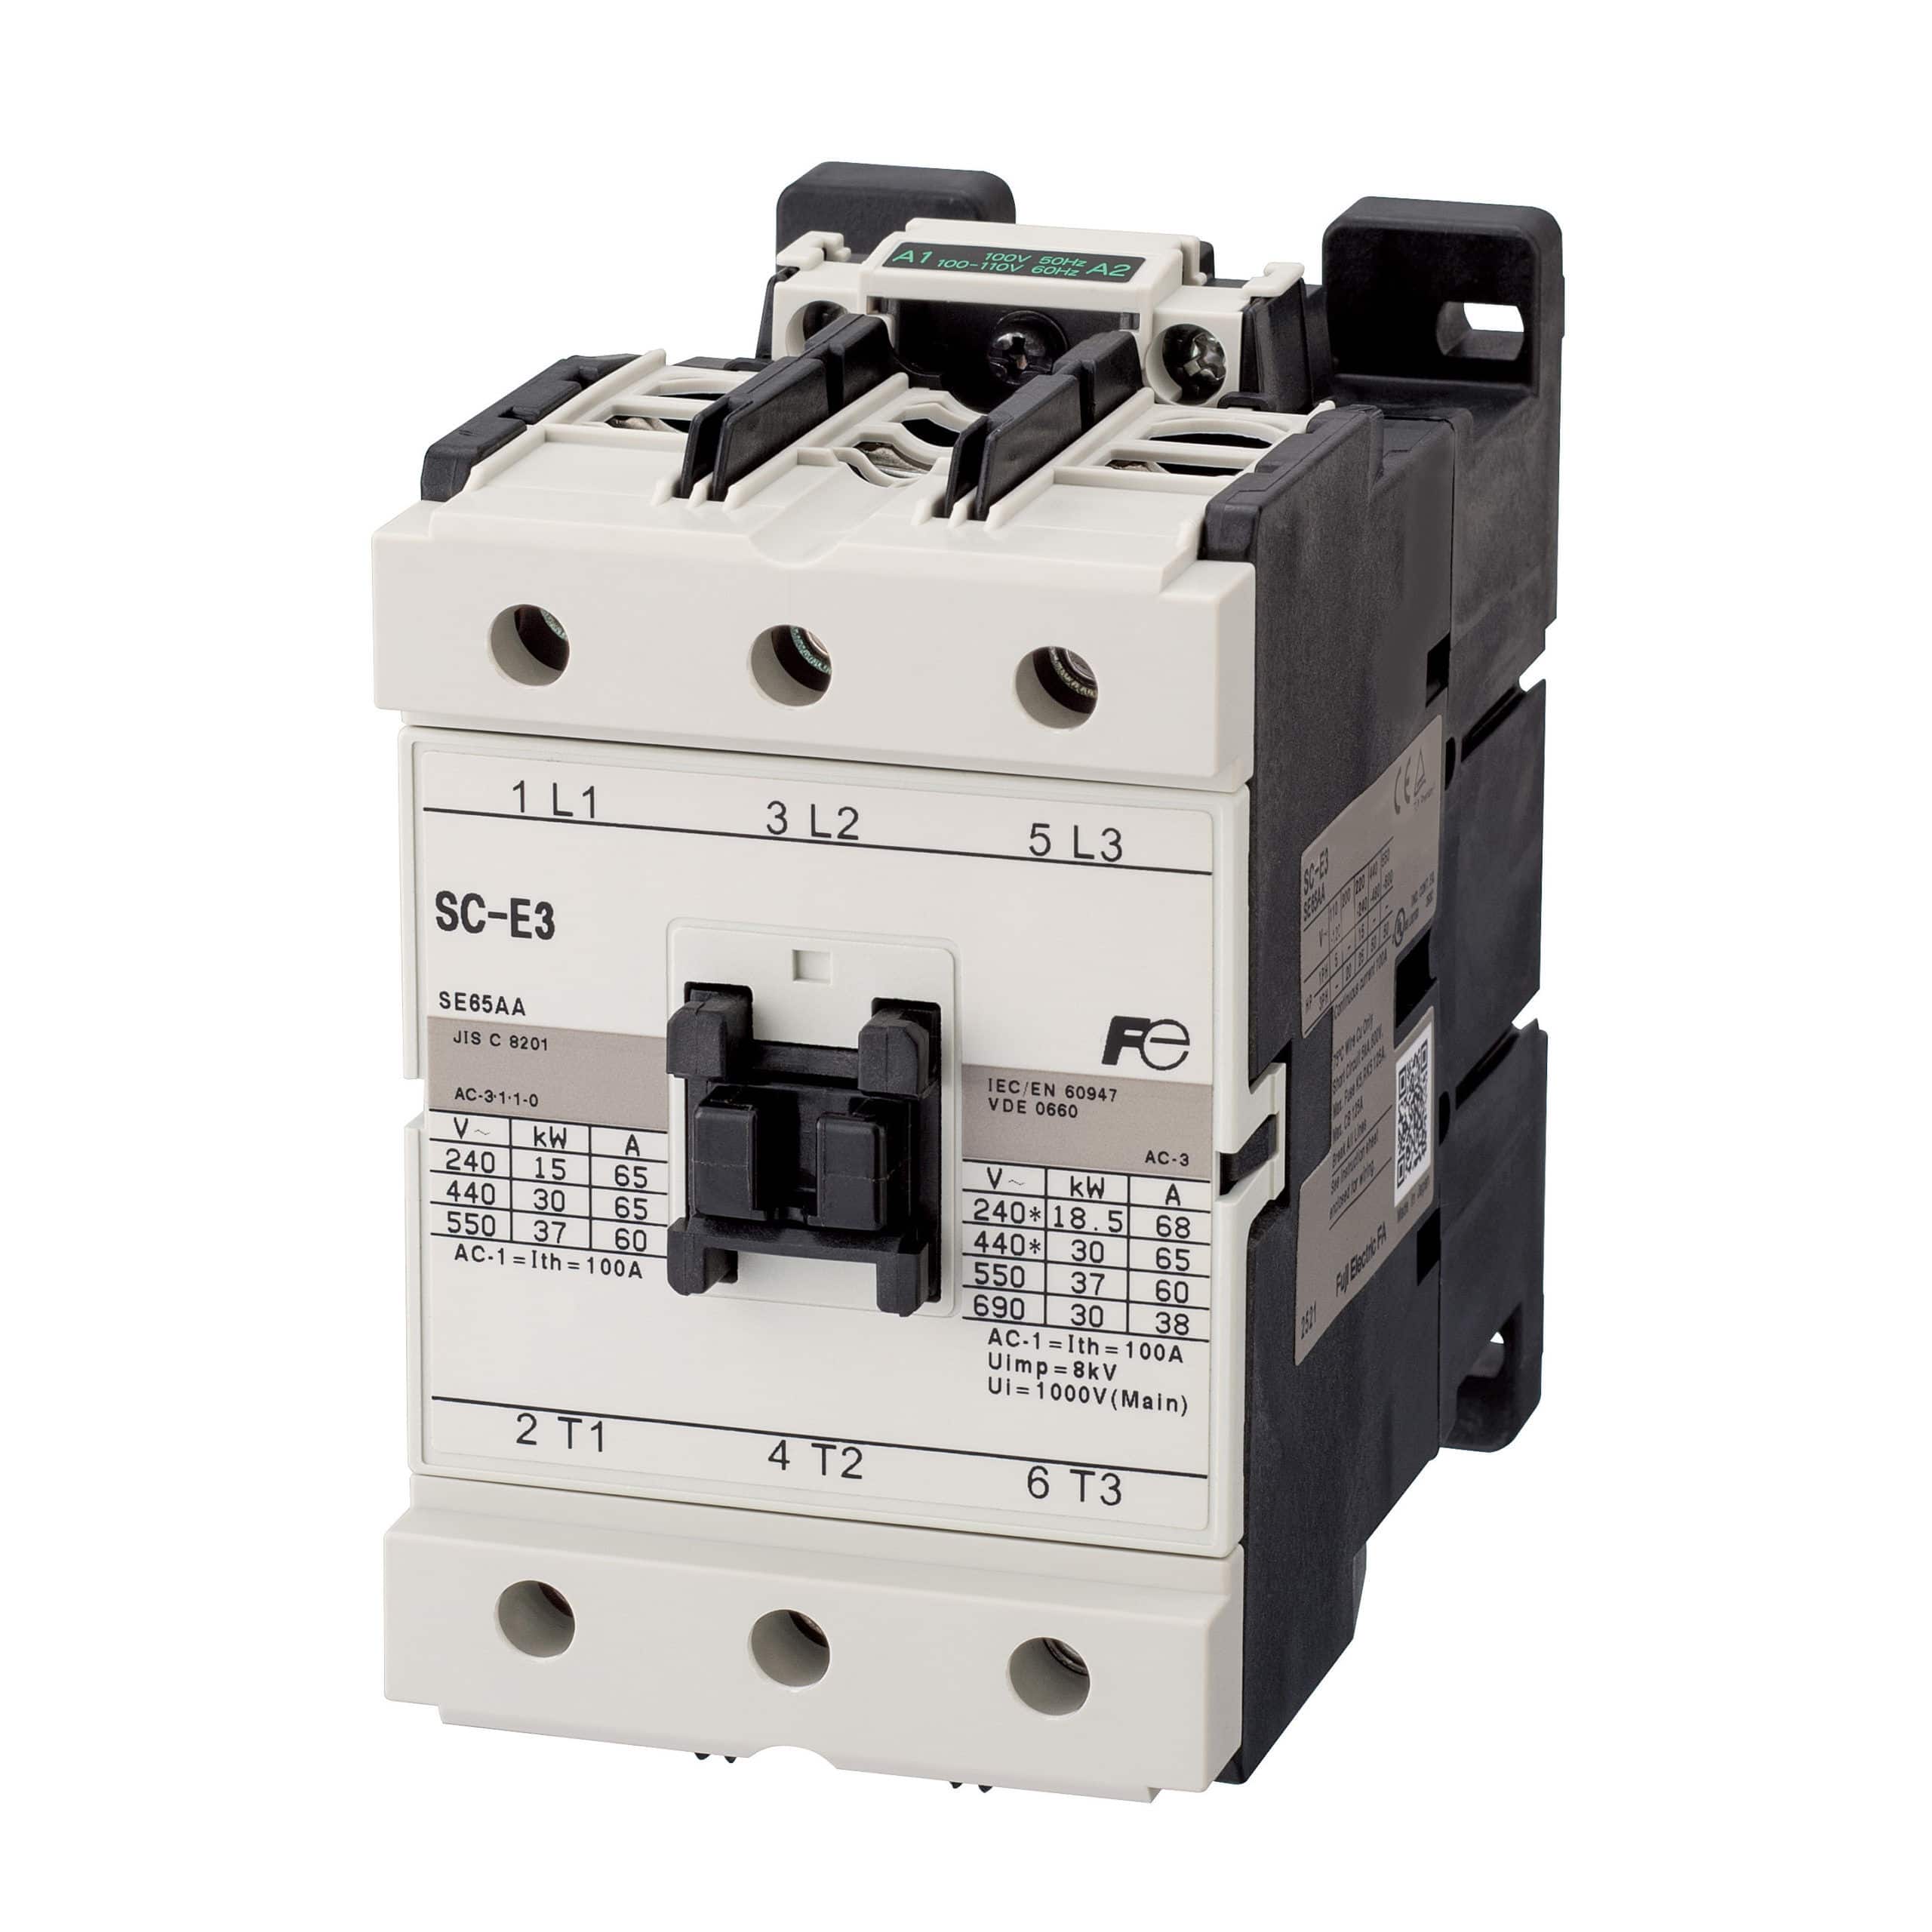 4NK0AC TK-0N Used Warranty 0.24-0.36 A Details about   Fuji Electric Overload Relay 